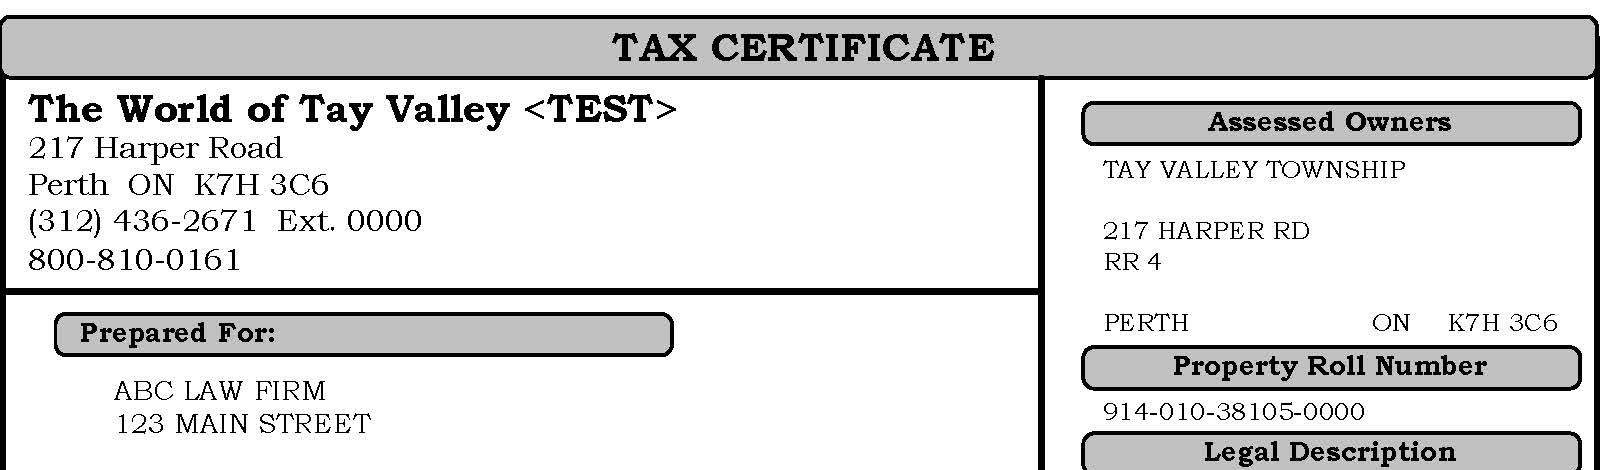 Tay Valley Townships Tax Certificate